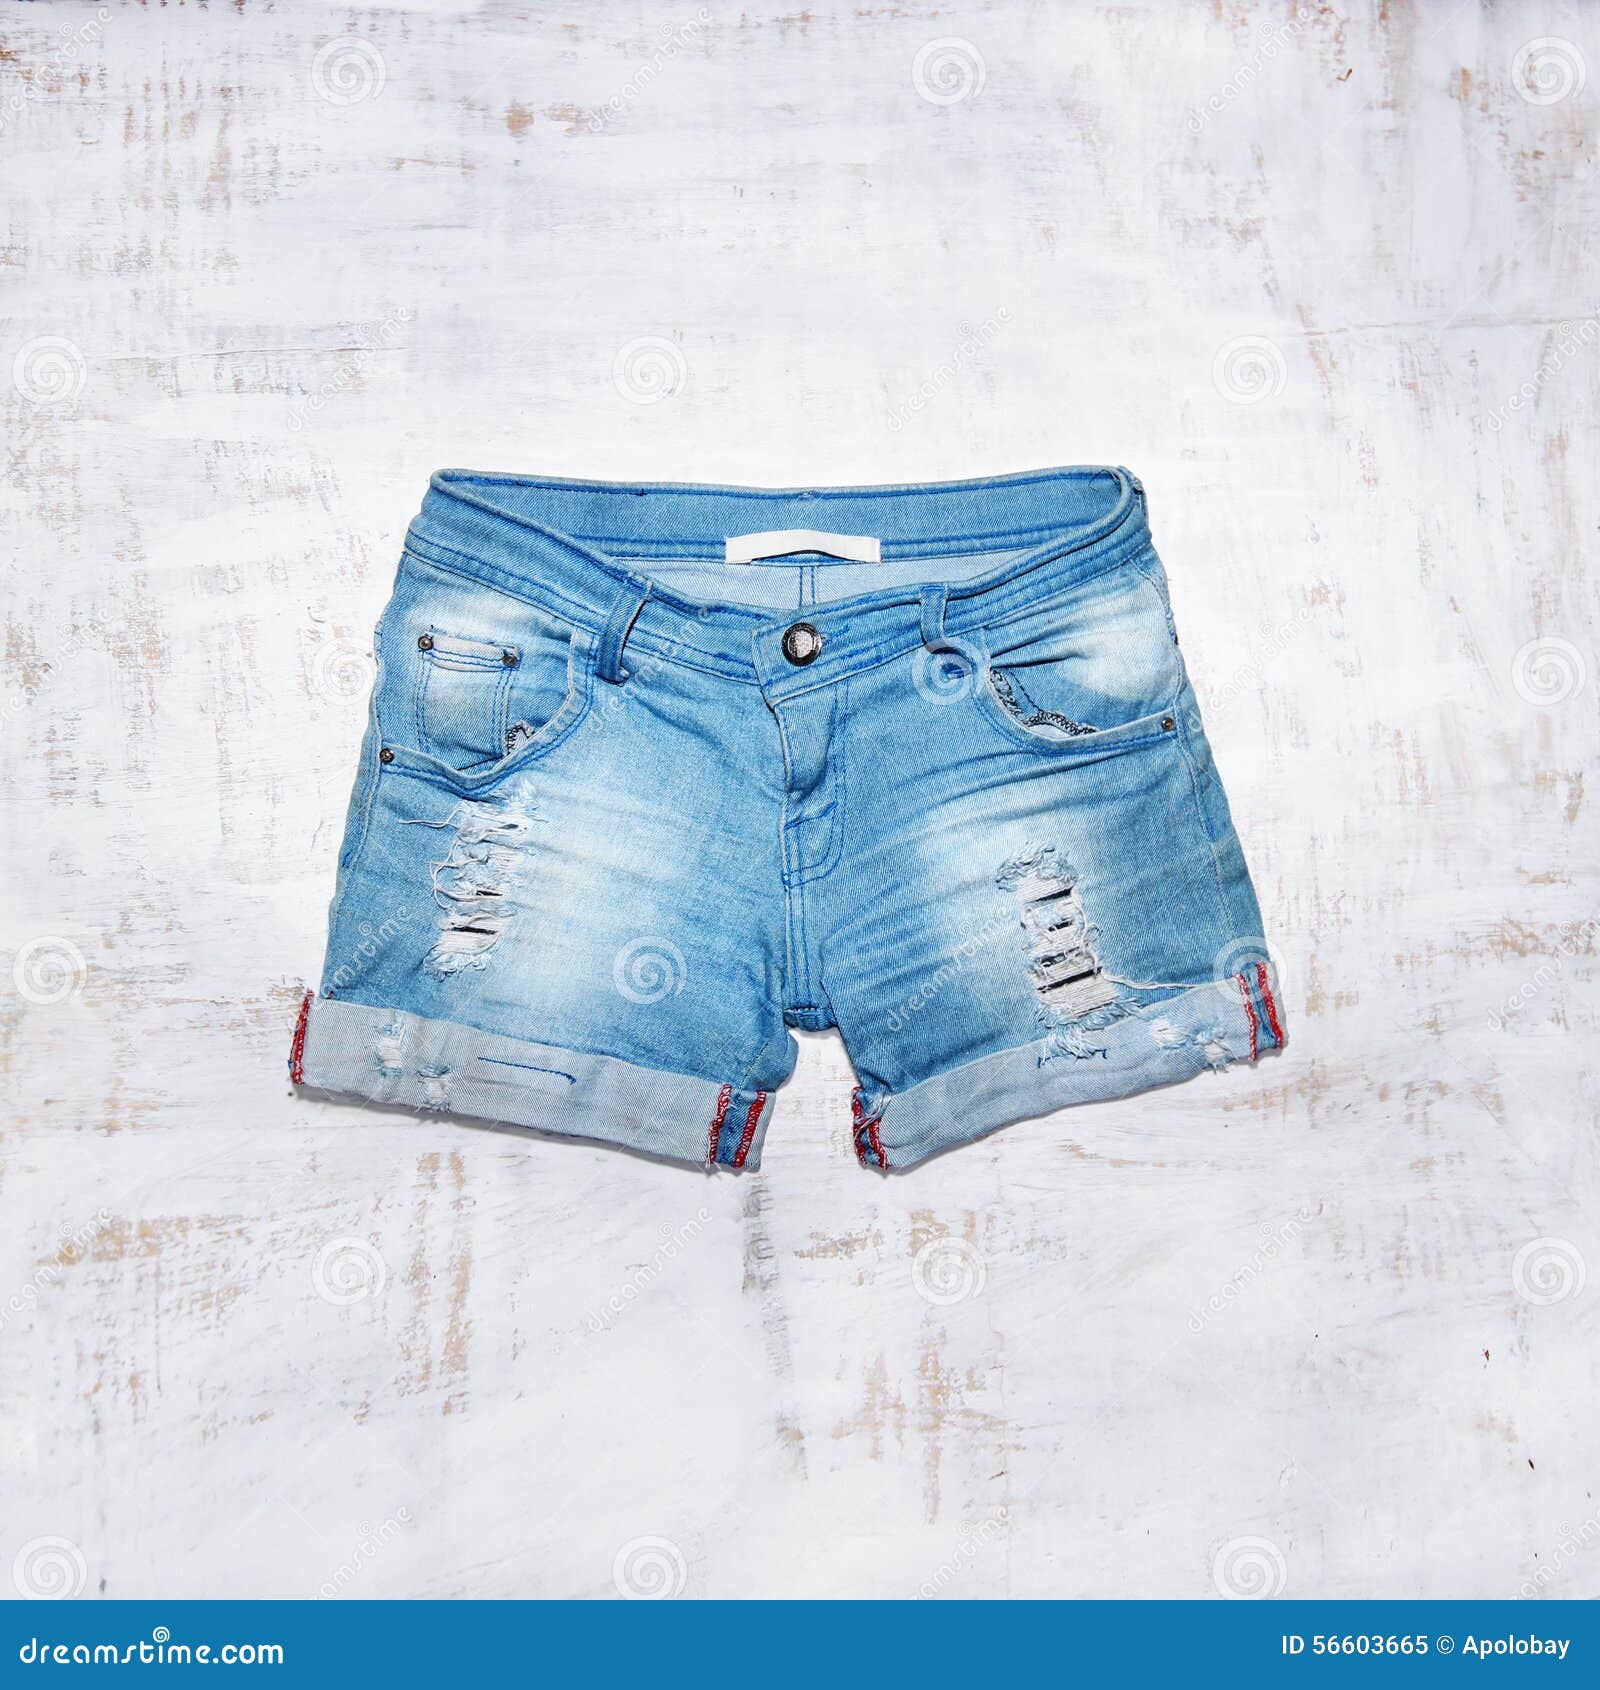 Jeans Shorts in Wood Background Stock Image - Image of denim, boots ...